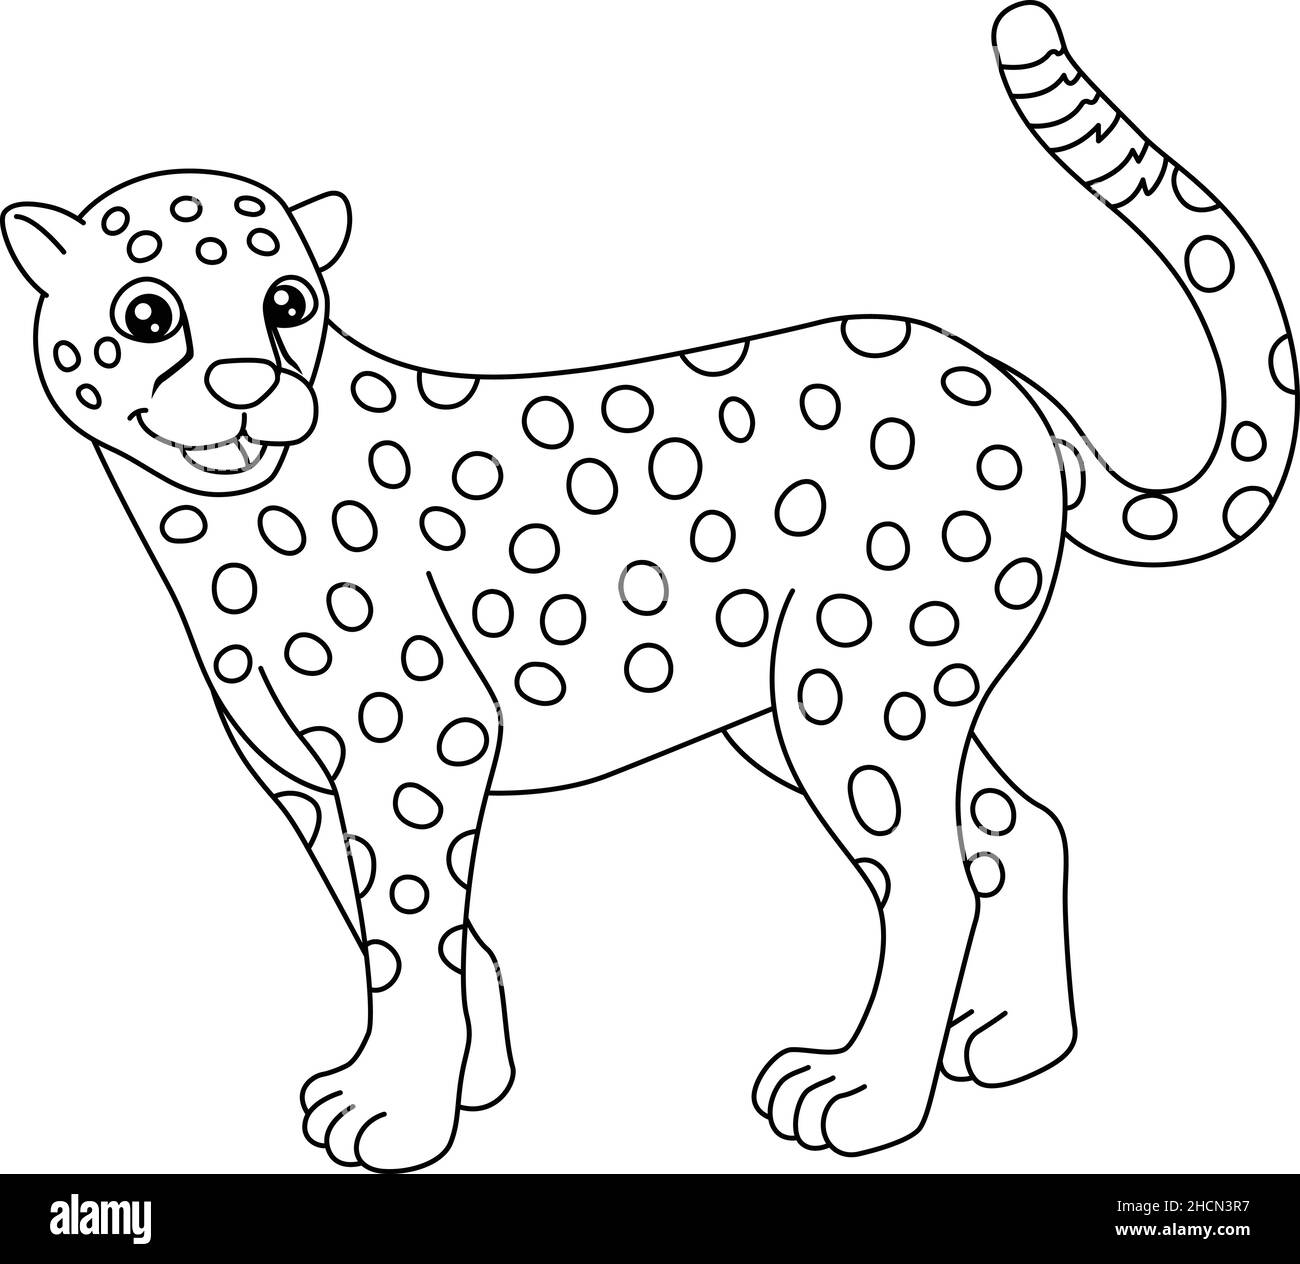 Cheetah coloring page isolated for kids stock vector image art